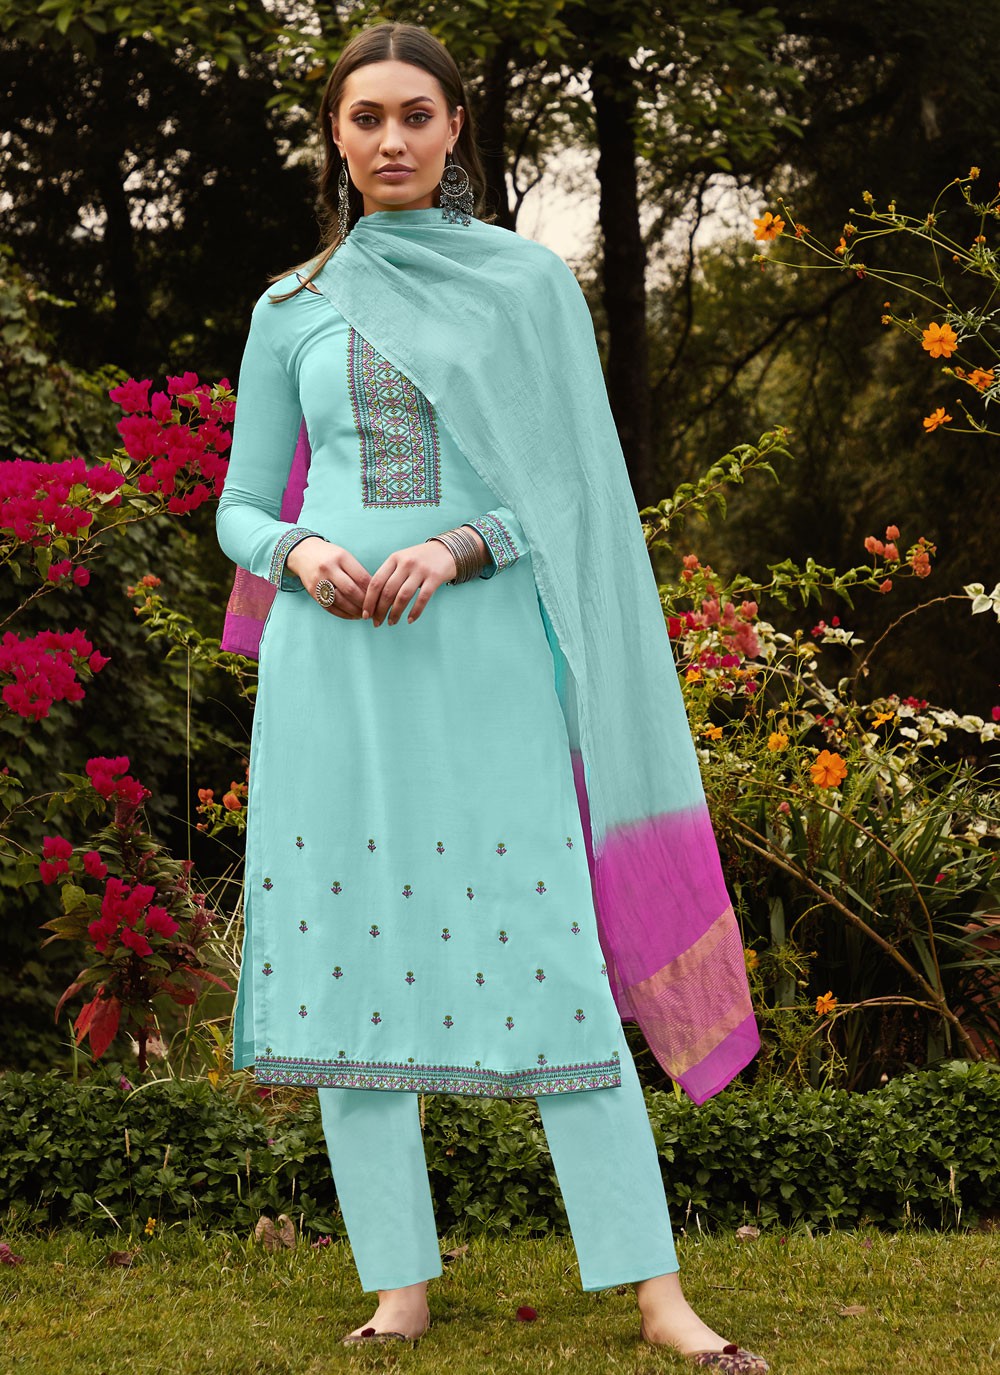 Embroidered Muslin Pant Style Suit